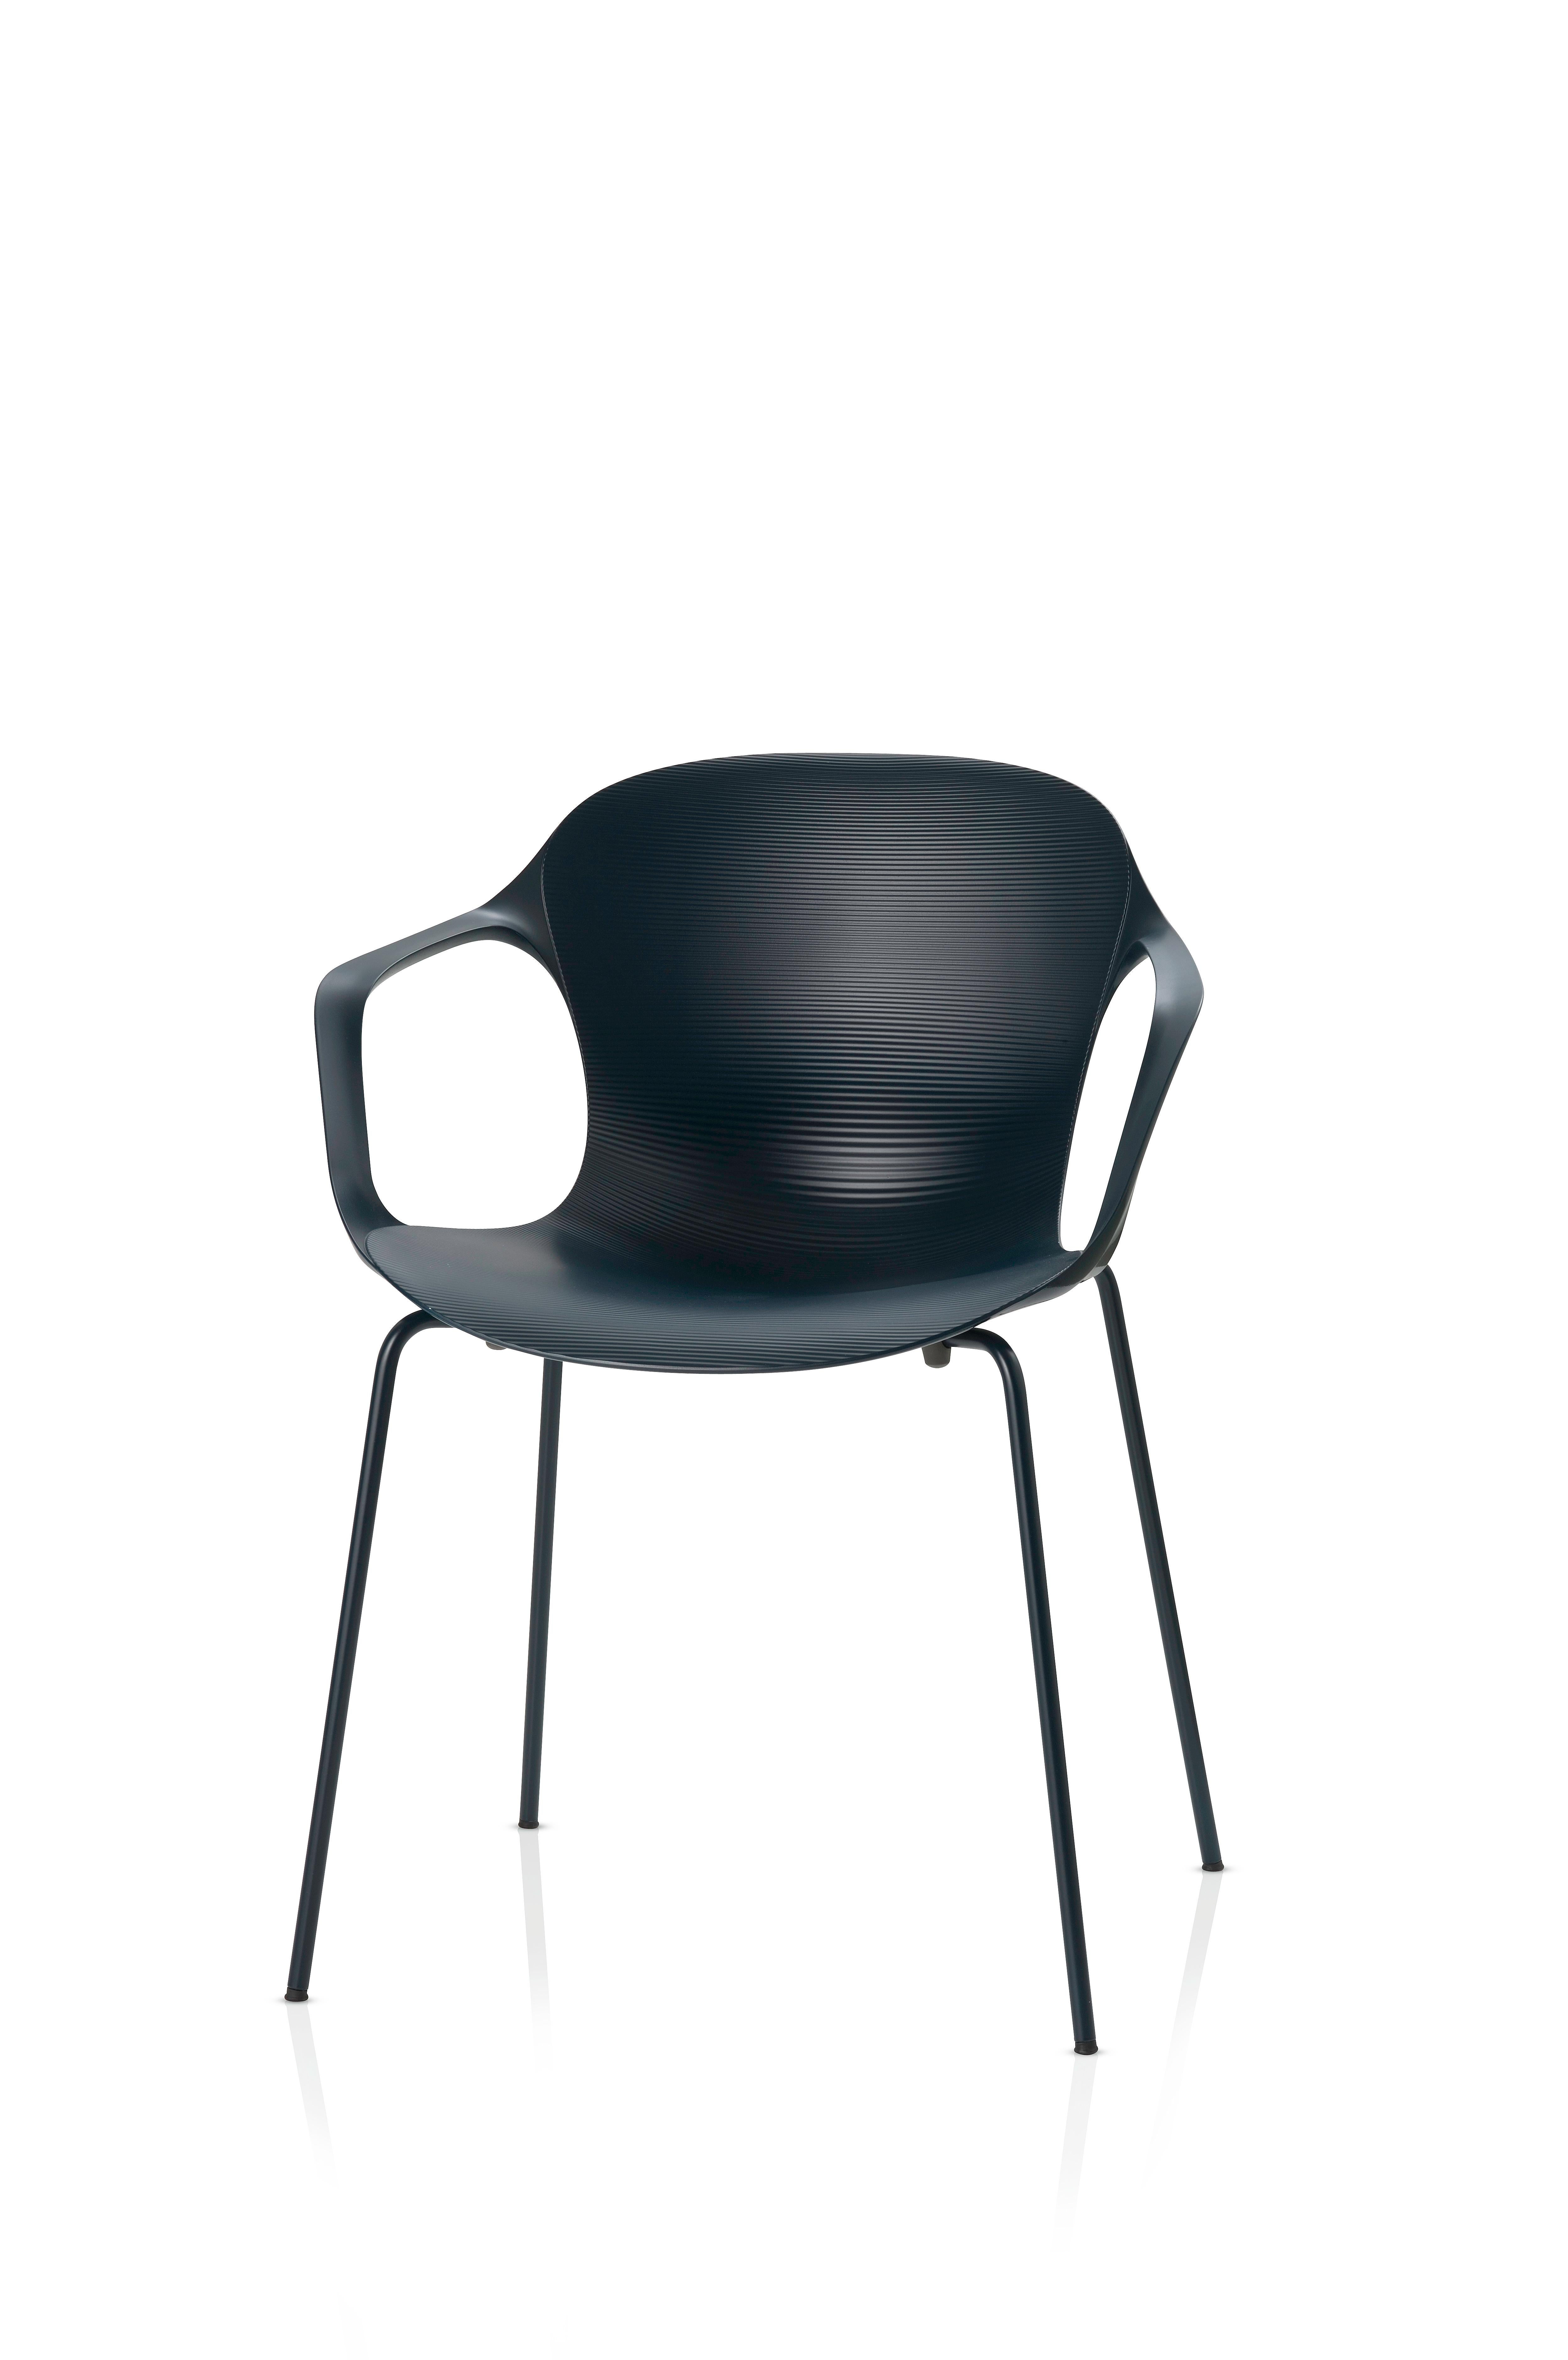 The NAP chair is a reflection of Kasper Salto’s approach to design. “For me design is about relevance. To always create a product that has relevance towards its user’s.” The Danish designer Kasper Salto has designed the NAP chair for Fritz Hansen.